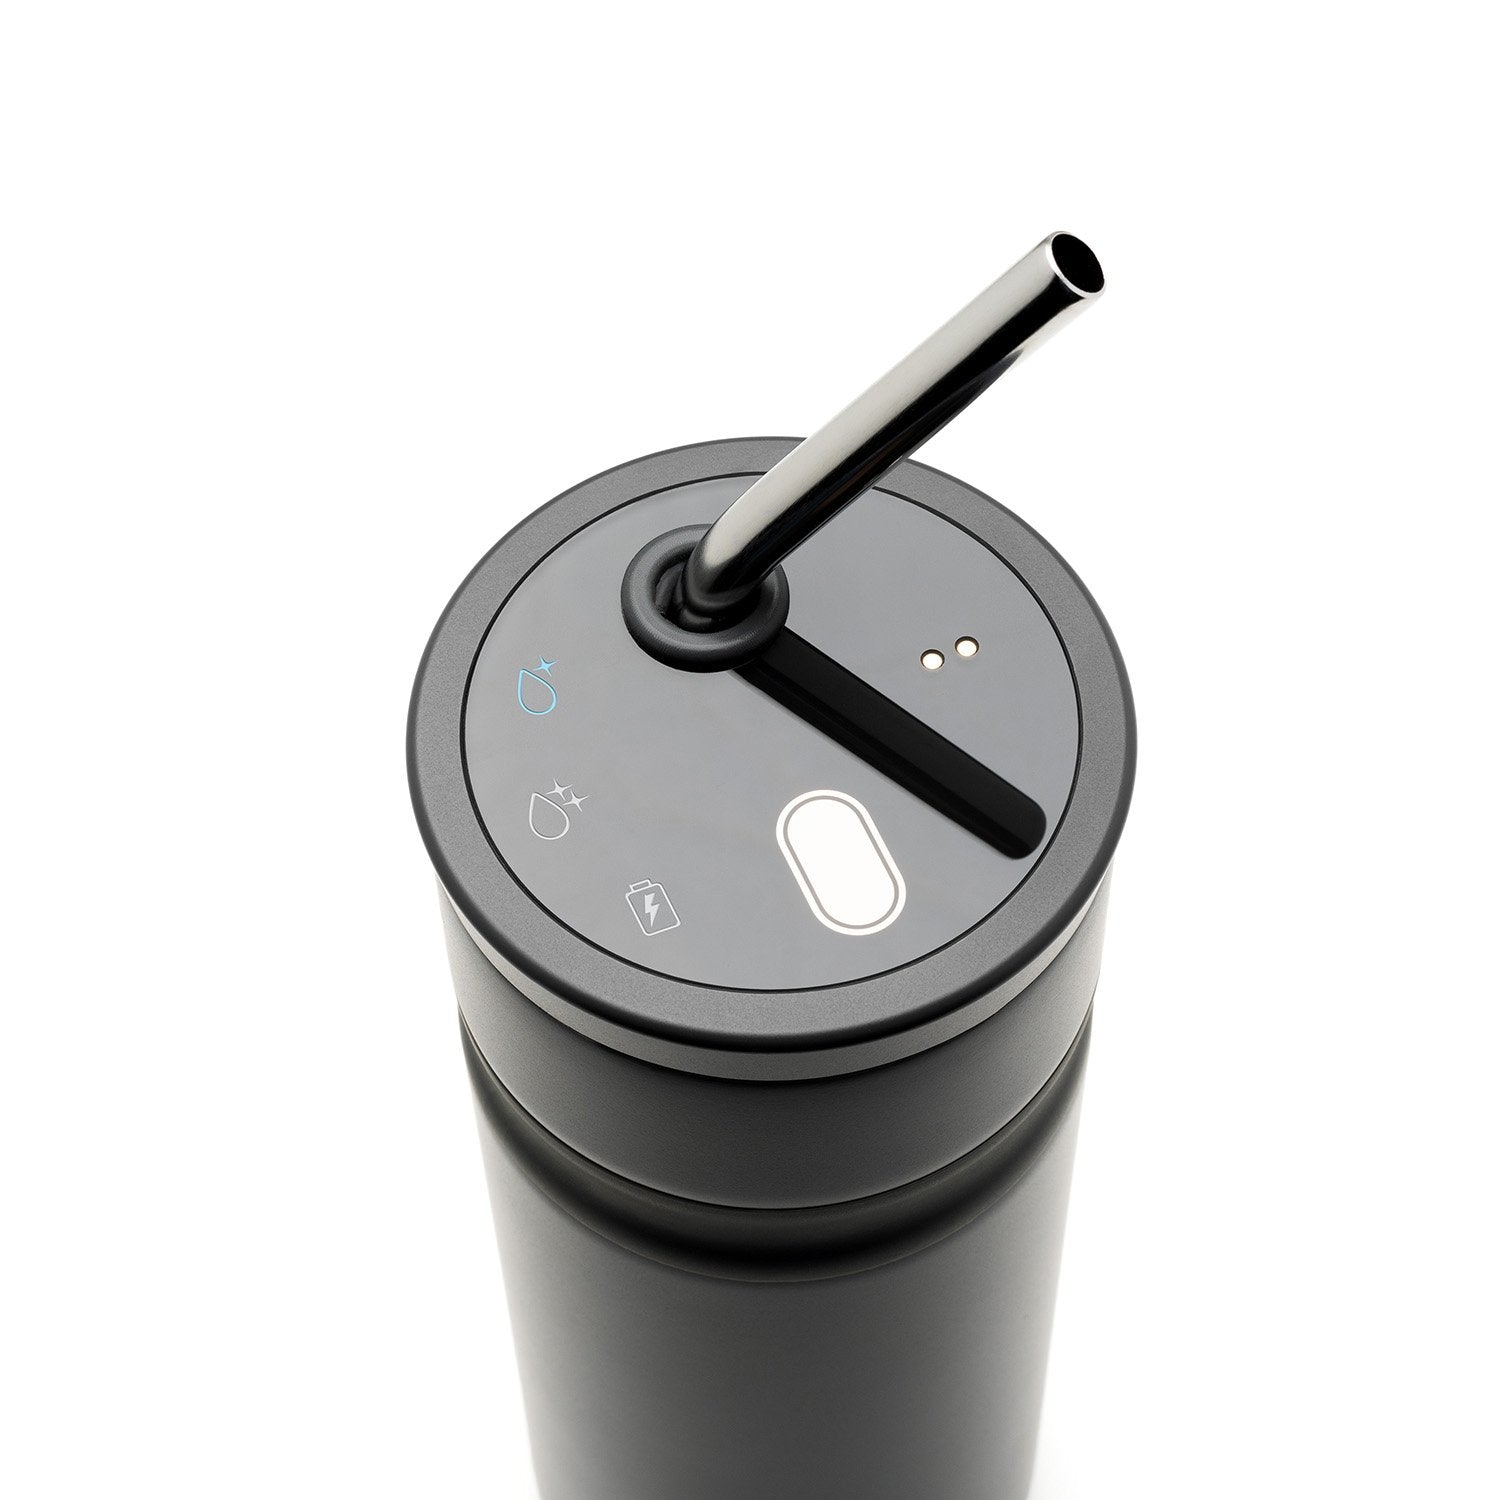 Top view of black metal bottle with metal straw